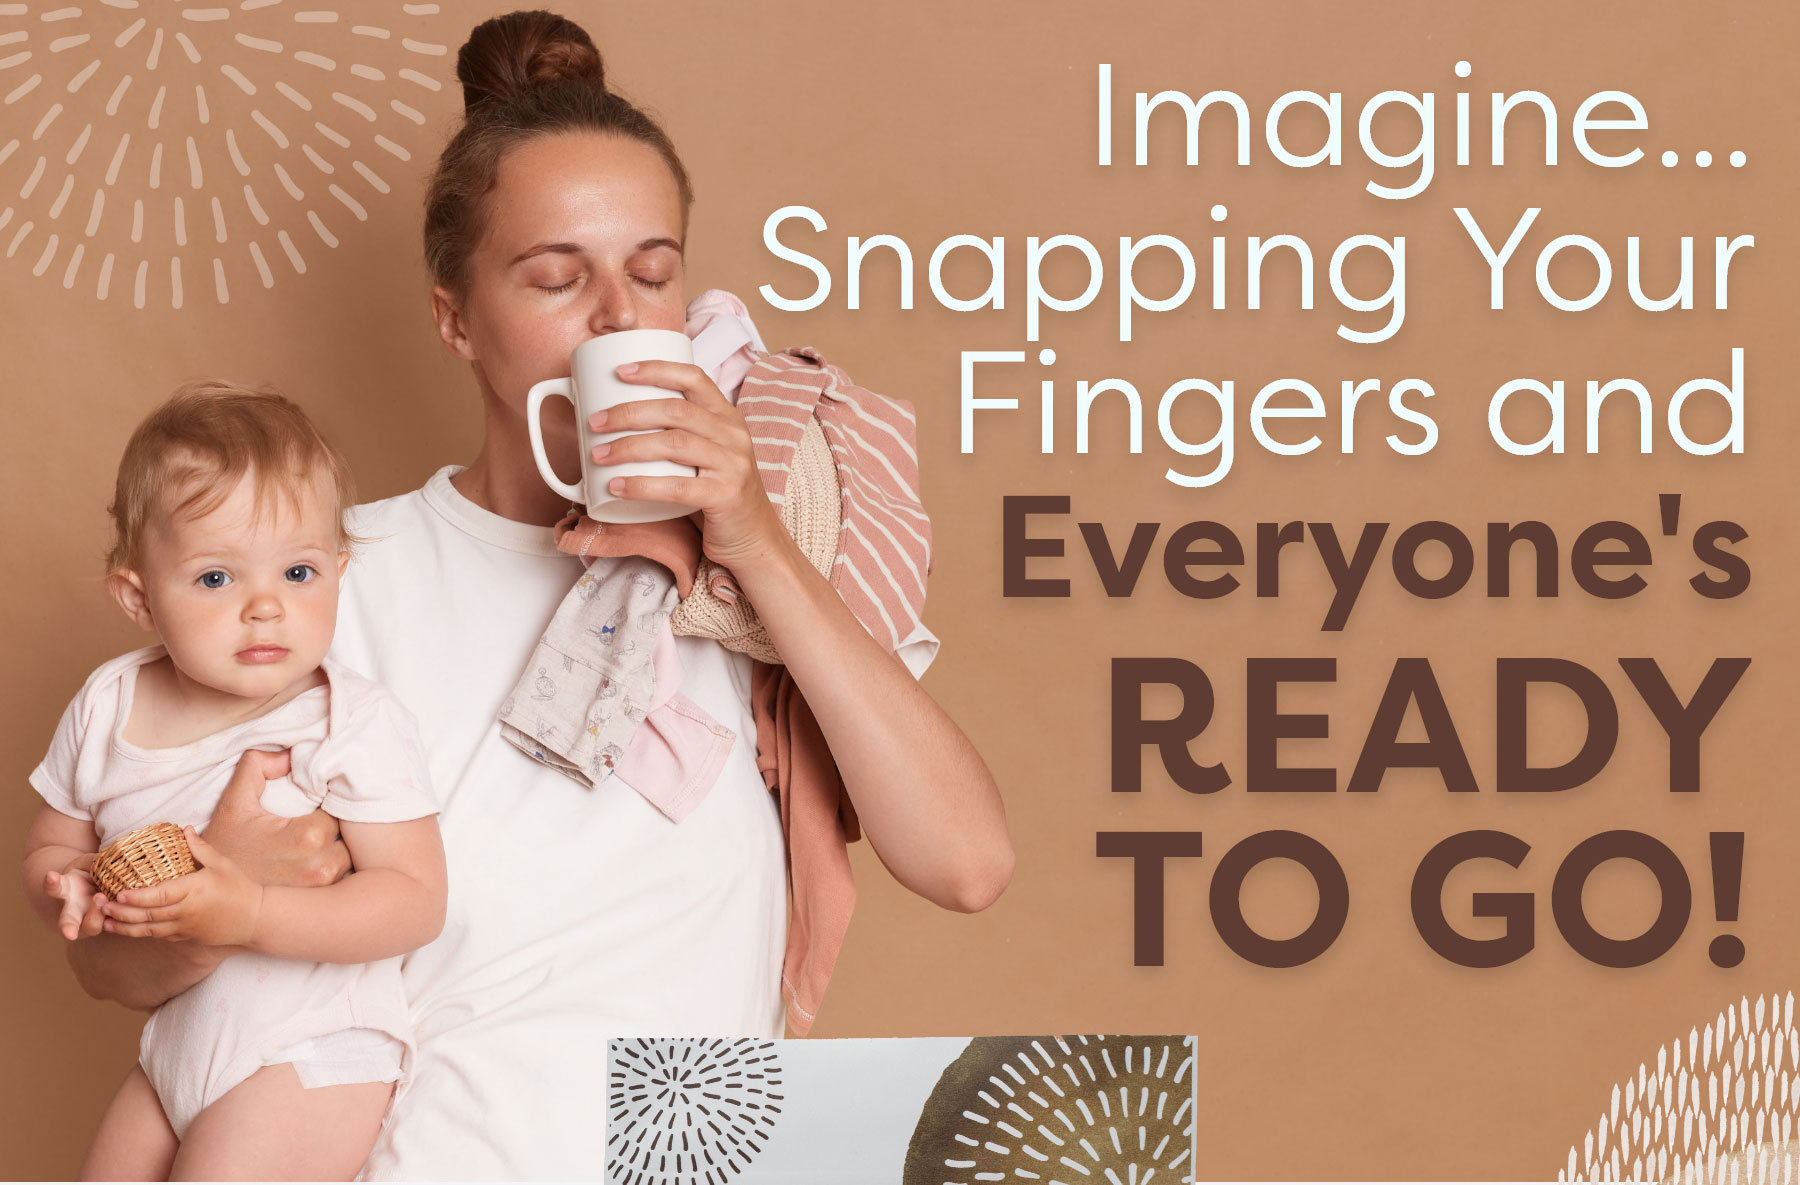 Imagine Snapping Your Fingers and Everyone's Ready to Go!